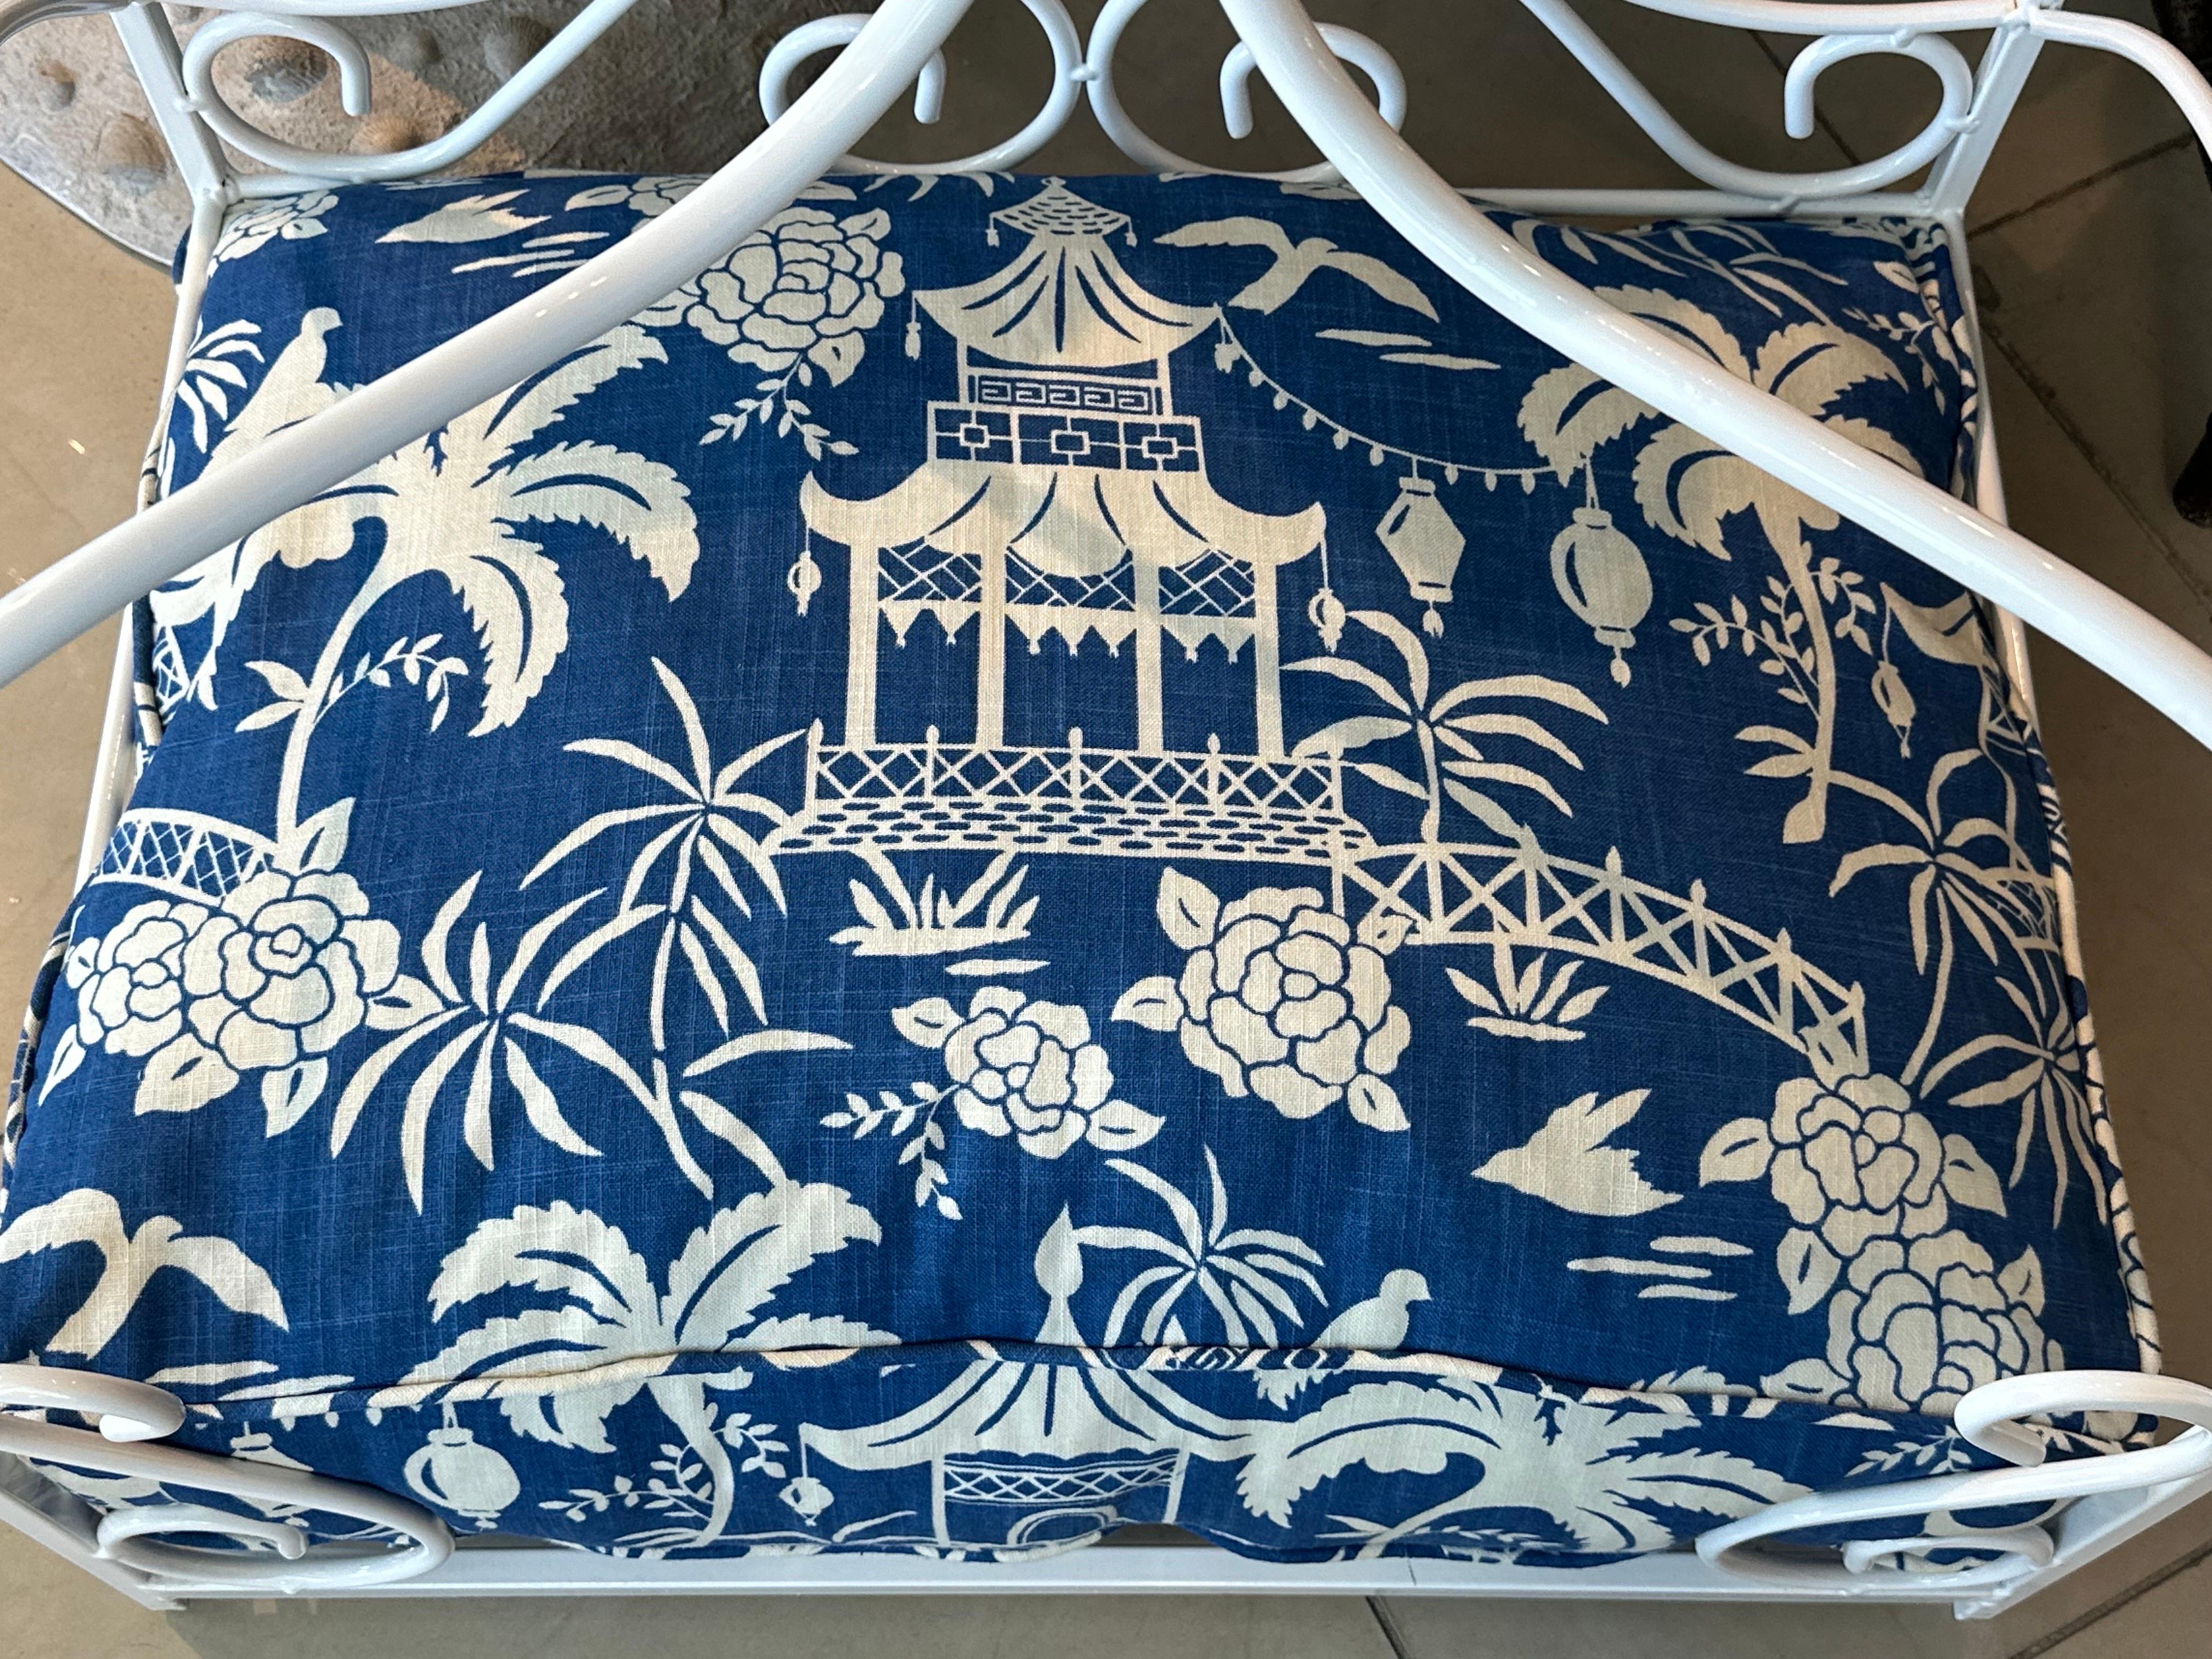 Beautiful vintage wrought iron metal canopy pagoda pet dog bed that has been newly powder-coated and newly upholstered with a custom cushion. Removable cover has zipper so it can be washed. Chinoiserie blue and white upholstery. Dimensions: 26 H x